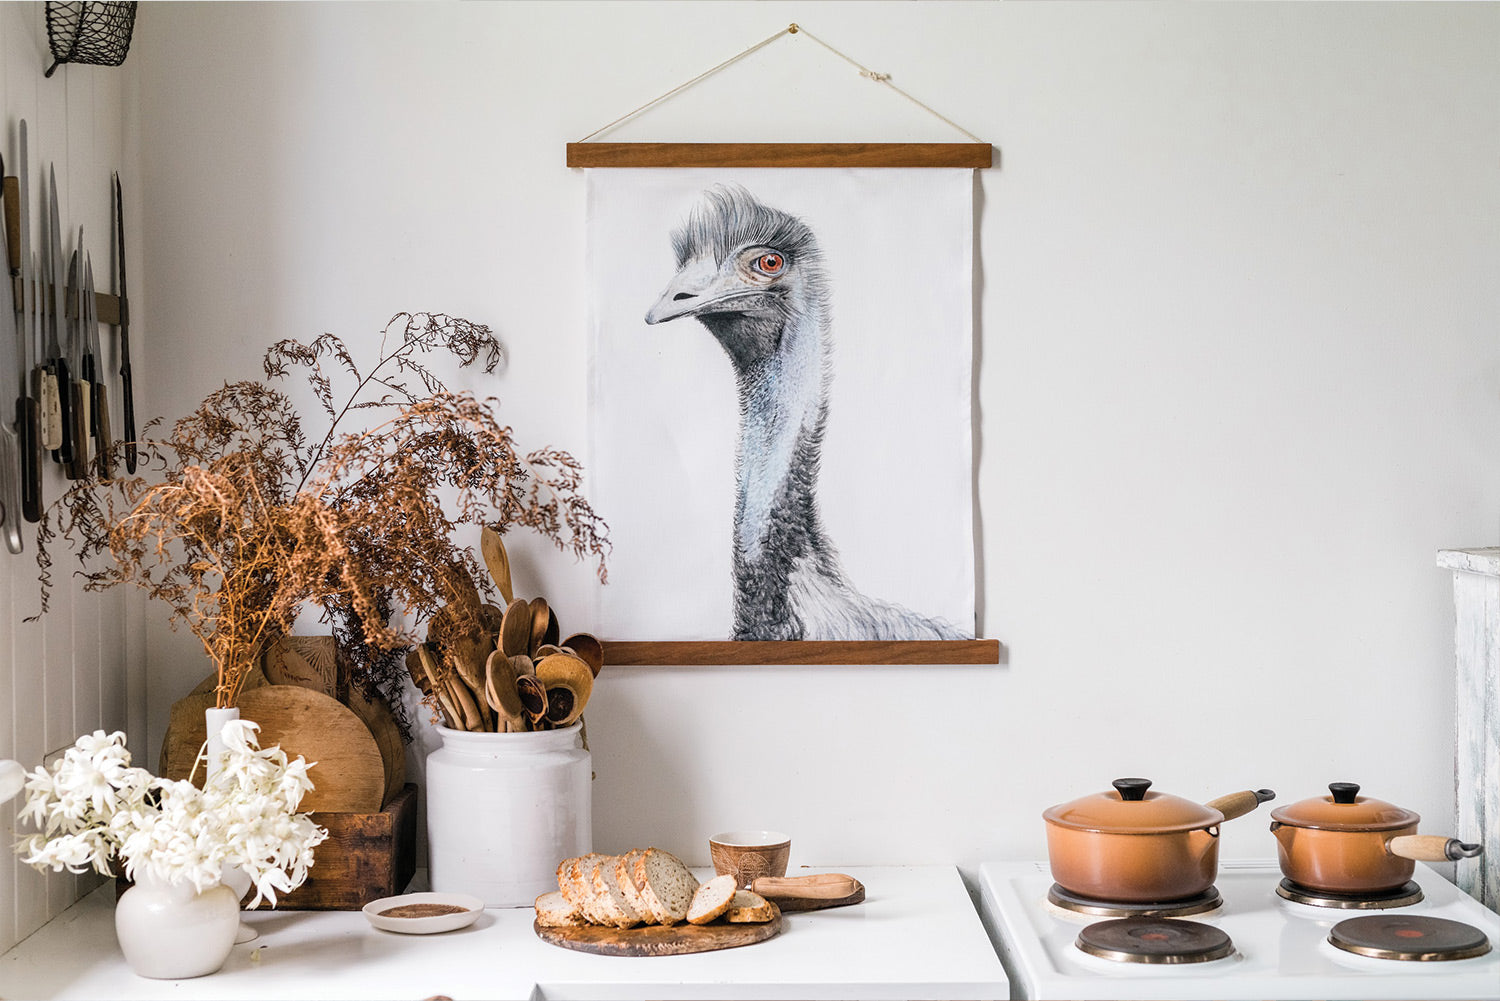 Earl the emu linen tea towel hanging in styled kitchen